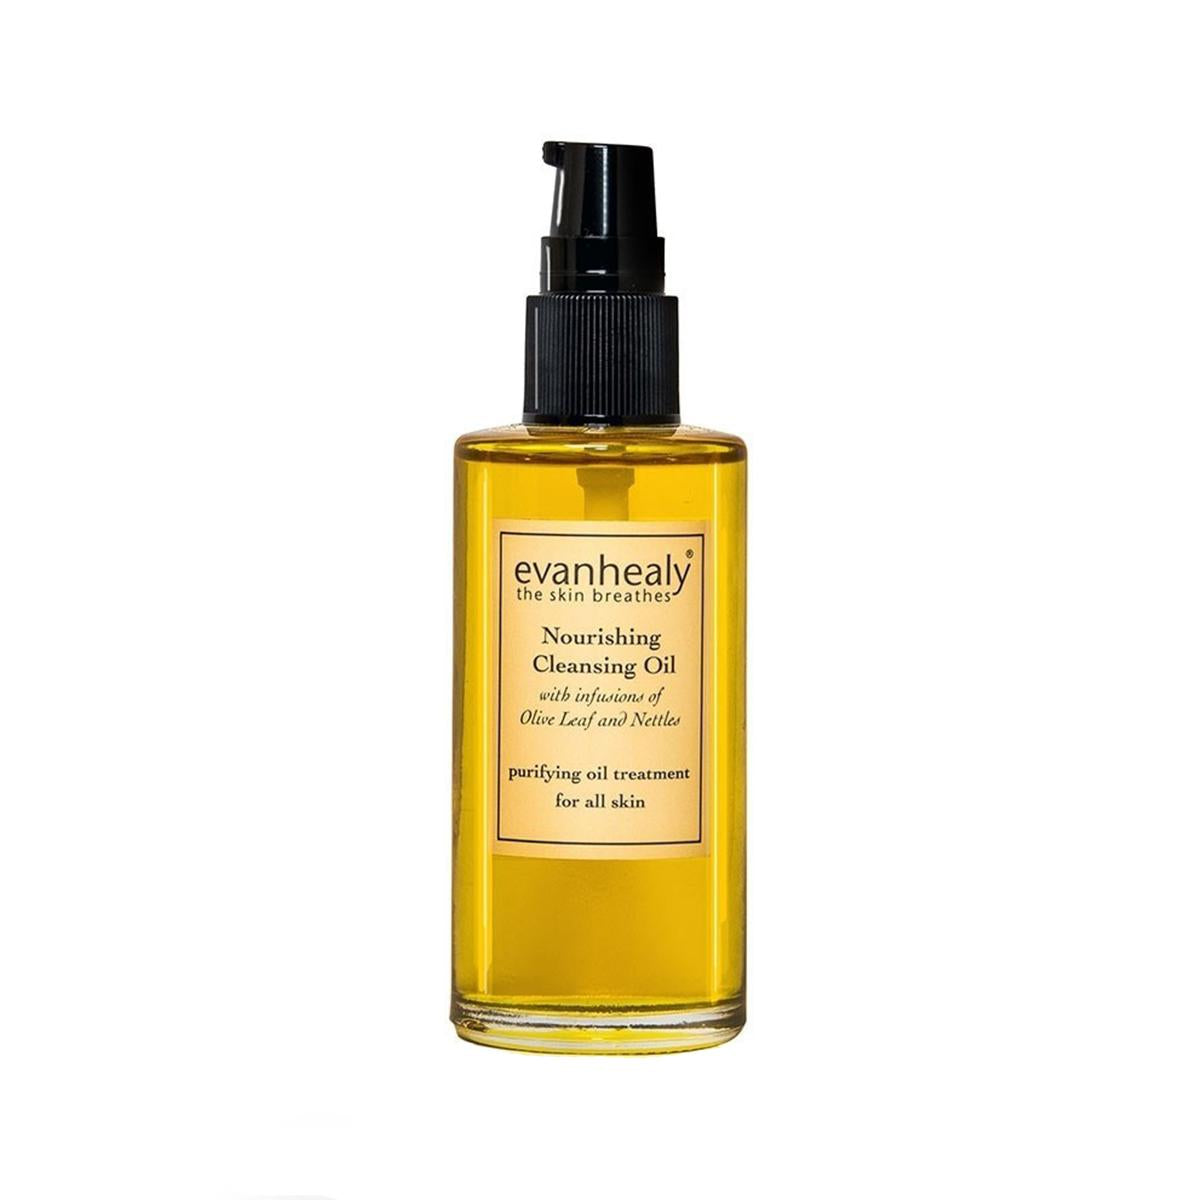 Primary image of Nourishing Cleansing Oil